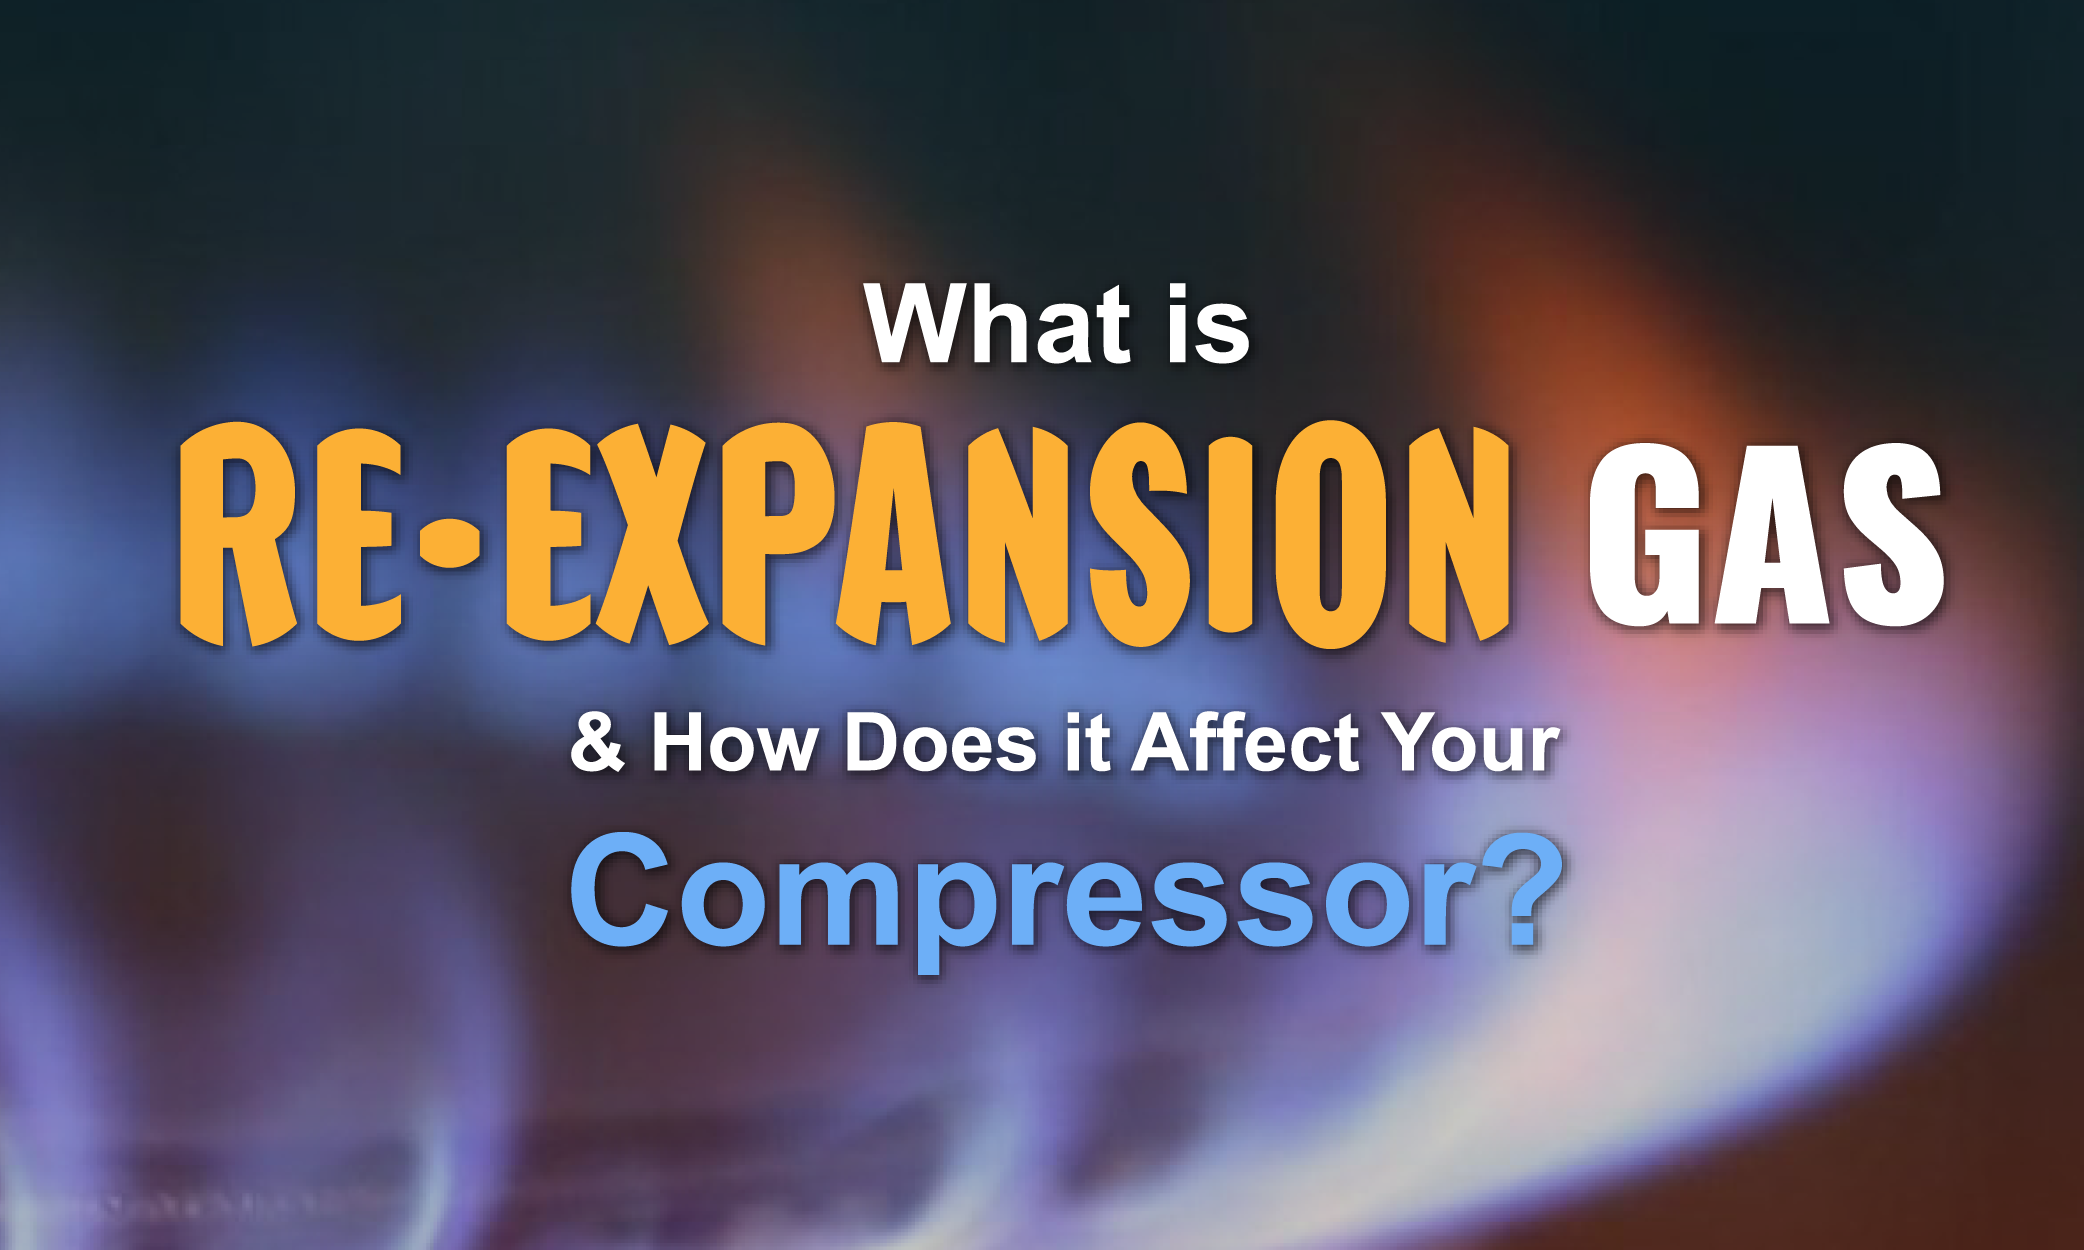 ReExpansionGas-bloggraphic-01